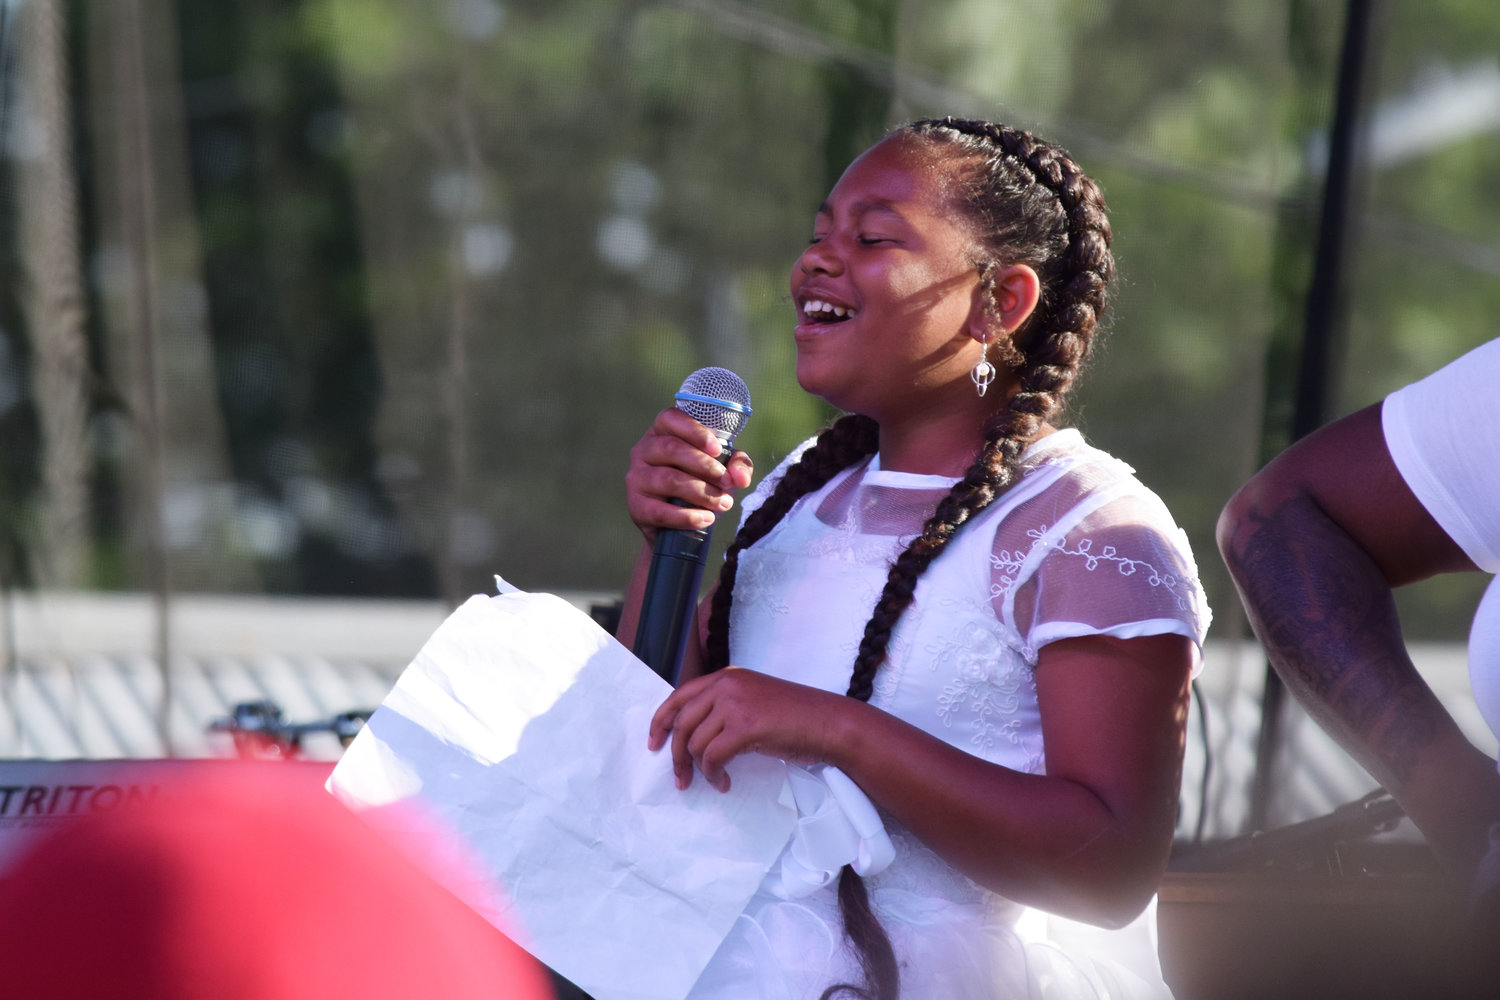 At eleven years old11-year-old community member Innocynce sings “Lift Every Voice and Sing,” the Black national anthem, before the Concert Honoring Families of Injustice or Loss at the Rise & Remember event on May 25th at George Floyd Square. Youth entrepreneur Innocynce also helps run the D.I.H. (Do It Herself) Positive Corner booth at events.